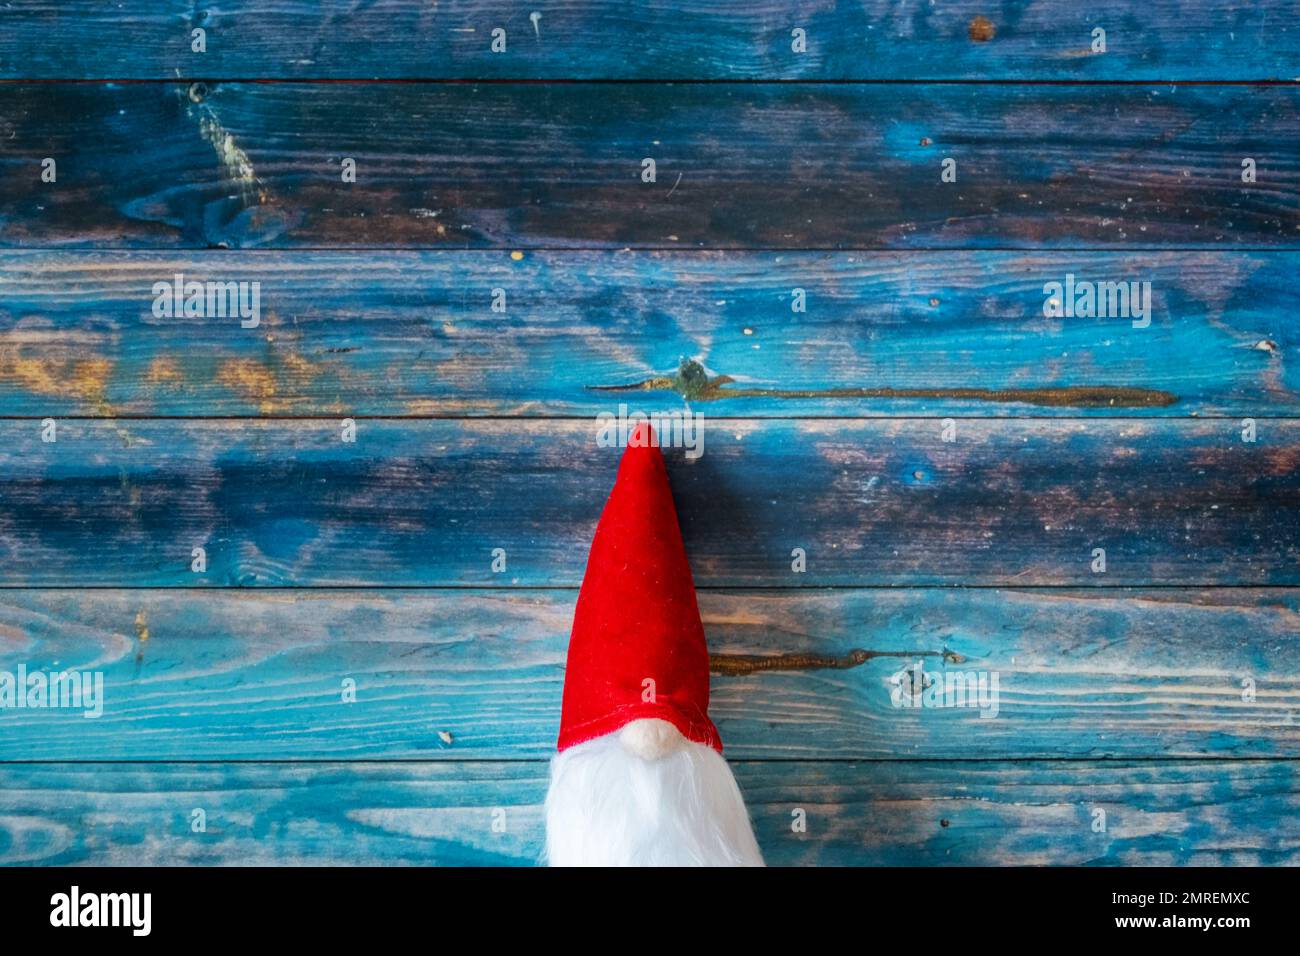 A top view of a cute red Christmas gnome toy on a blue wooden surface with copy space Stock Photo